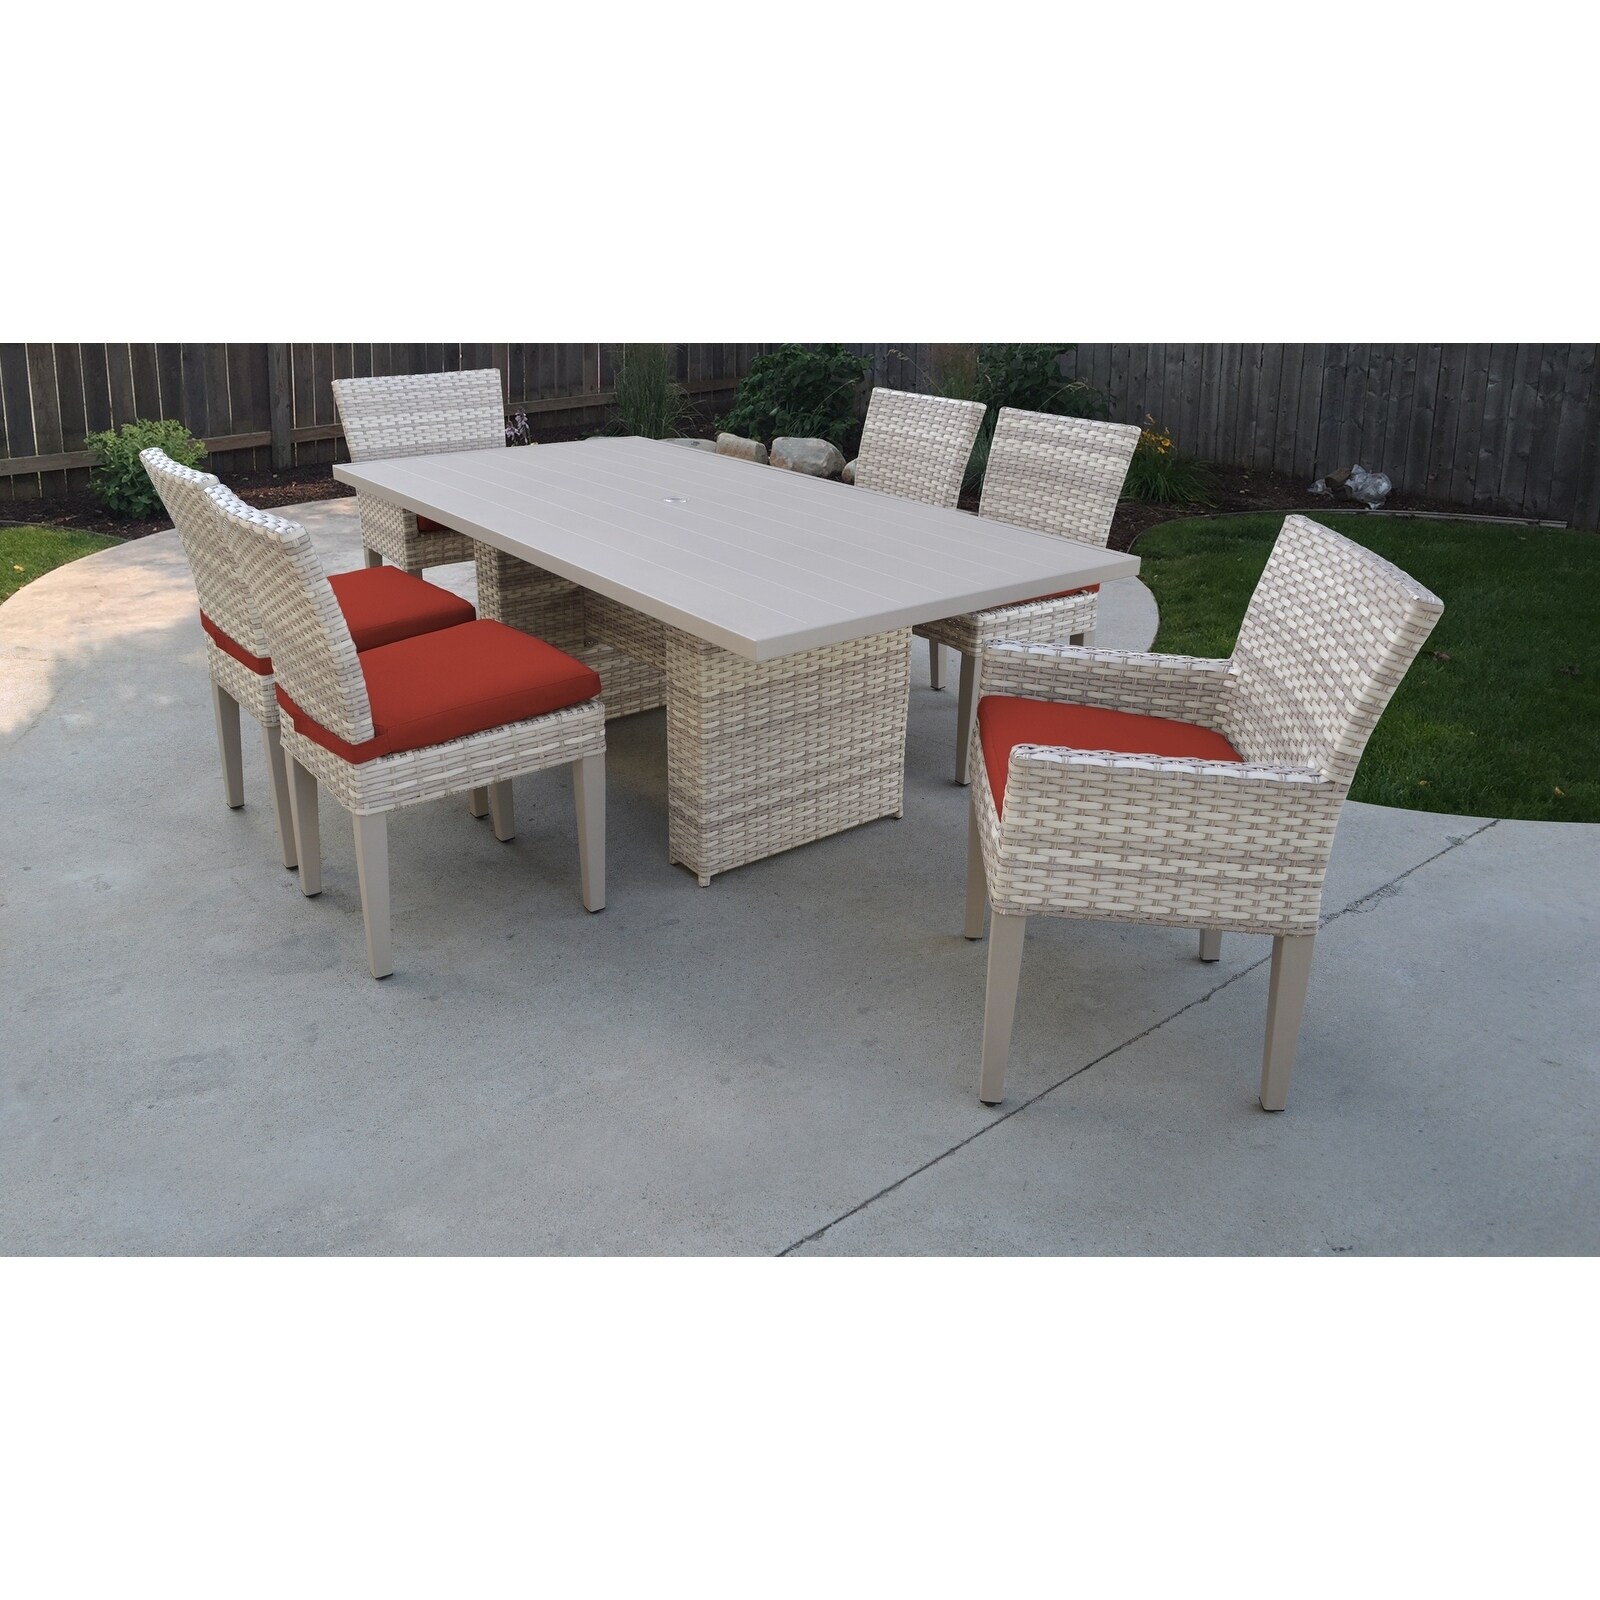 Fairmont Rectangular Outdoor Patio Dining Table With 4 Armless Chairs And 2 Chairs W/ Arms